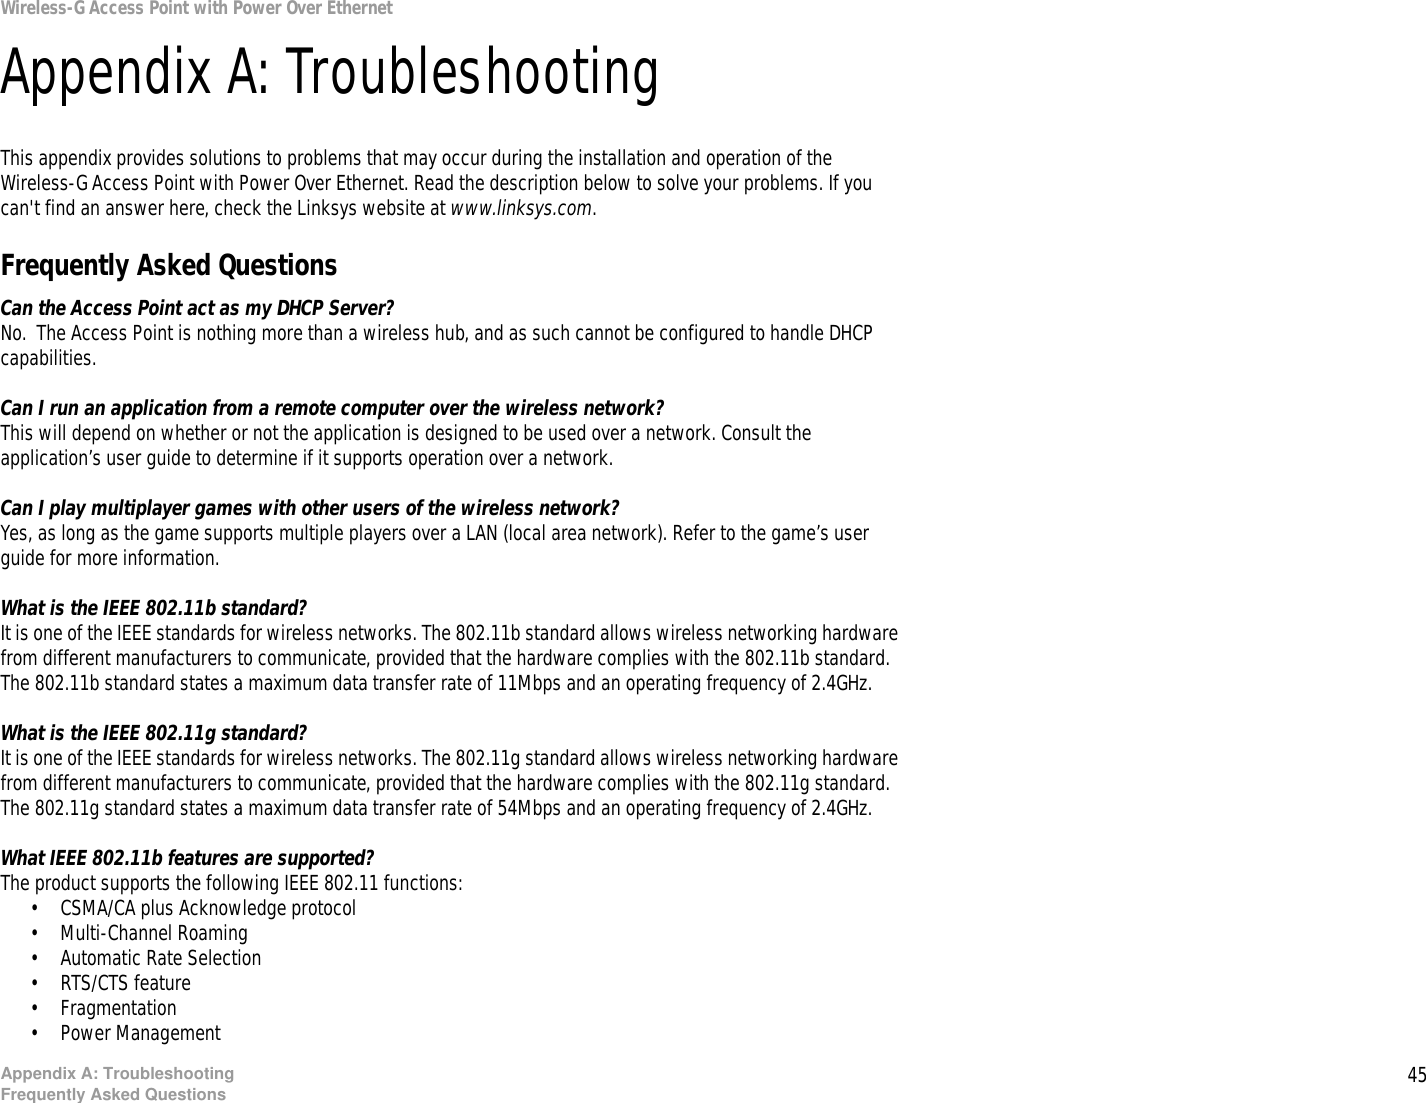 45Appendix A: TroubleshootingFrequently Asked QuestionsWireless-G Access Point with Power Over EthernetAppendix A: TroubleshootingThis appendix provides solutions to problems that may occur during the installation and operation of the Wireless-G Access Point with Power Over Ethernet. Read the description below to solve your problems. If you can&apos;t find an answer here, check the Linksys website at www.linksys.com.Frequently Asked QuestionsCan the Access Point act as my DHCP Server?No.  The Access Point is nothing more than a wireless hub, and as such cannot be configured to handle DHCP capabilities.Can I run an application from a remote computer over the wireless network?This will depend on whether or not the application is designed to be used over a network. Consult the application’s user guide to determine if it supports operation over a network.Can I play multiplayer games with other users of the wireless network?Yes, as long as the game supports multiple players over a LAN (local area network). Refer to the game’s user guide for more information.What is the IEEE 802.11b standard?It is one of the IEEE standards for wireless networks. The 802.11b standard allows wireless networking hardware from different manufacturers to communicate, provided that the hardware complies with the 802.11b standard. The 802.11b standard states a maximum data transfer rate of 11Mbps and an operating frequency of 2.4GHz.What is the IEEE 802.11g standard?It is one of the IEEE standards for wireless networks. The 802.11g standard allows wireless networking hardware from different manufacturers to communicate, provided that the hardware complies with the 802.11g standard. The 802.11g standard states a maximum data transfer rate of 54Mbps and an operating frequency of 2.4GHz.What IEEE 802.11b features are supported?The product supports the following IEEE 802.11 functions: • CSMA/CA plus Acknowledge protocol • Multi-Channel Roaming • Automatic Rate Selection • RTS/CTS feature • Fragmentation • Power Management  